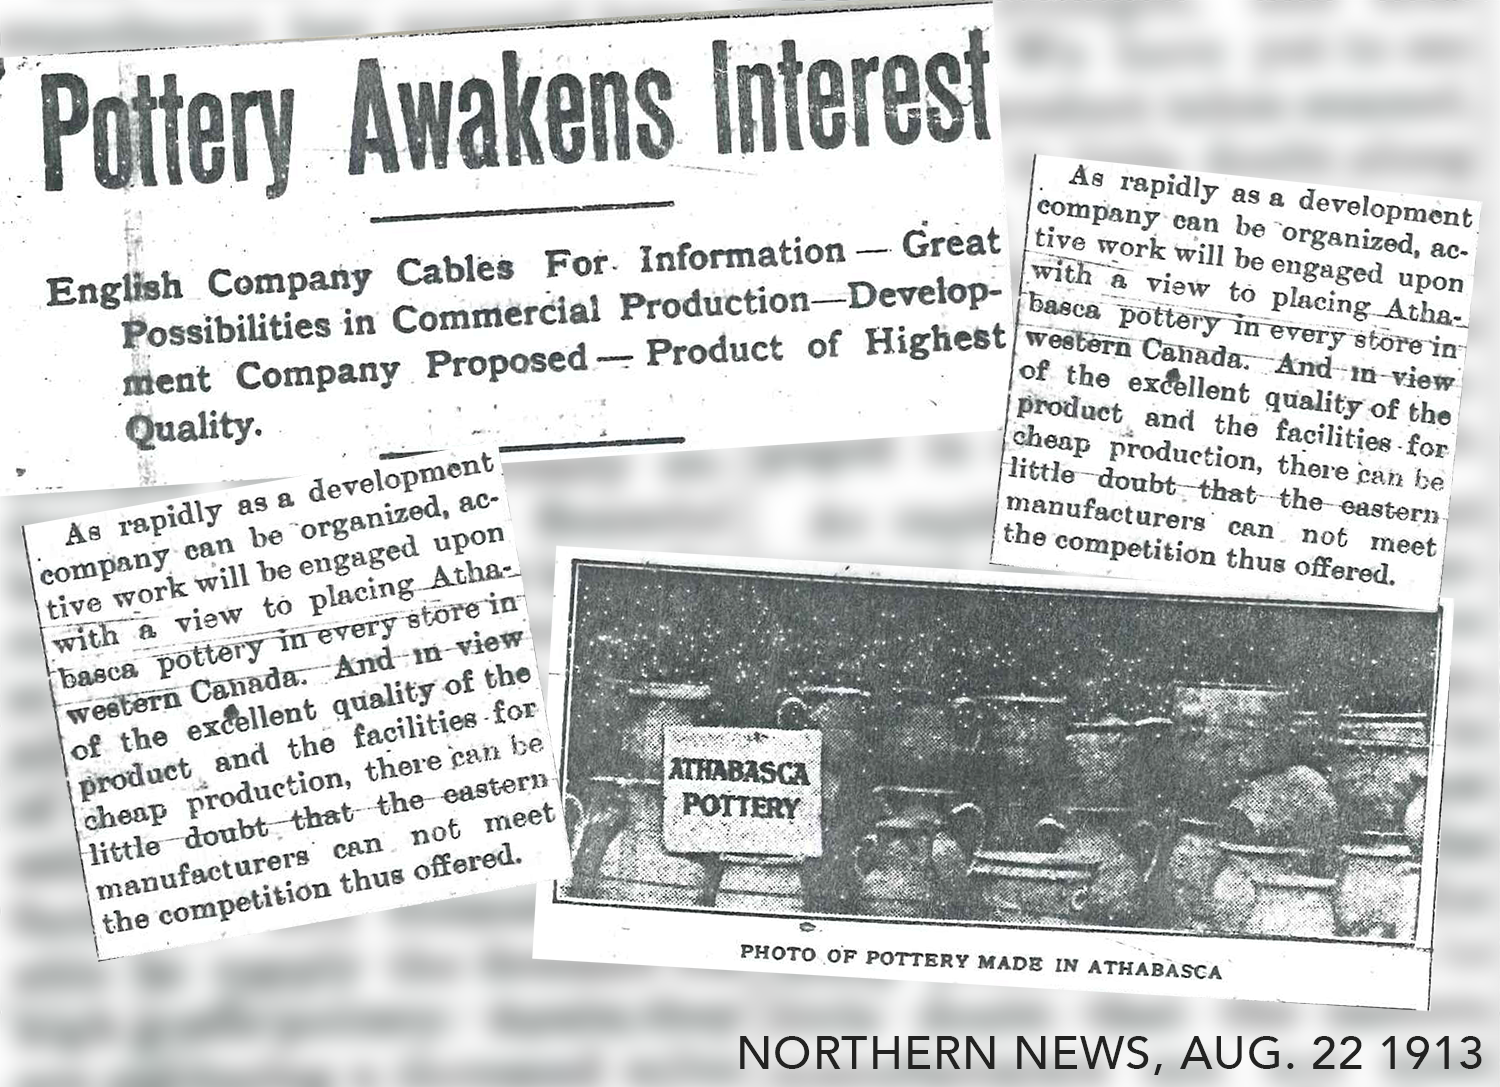 An article from the August 22, 1913 Northern News, talking about pottery in Athabasca.